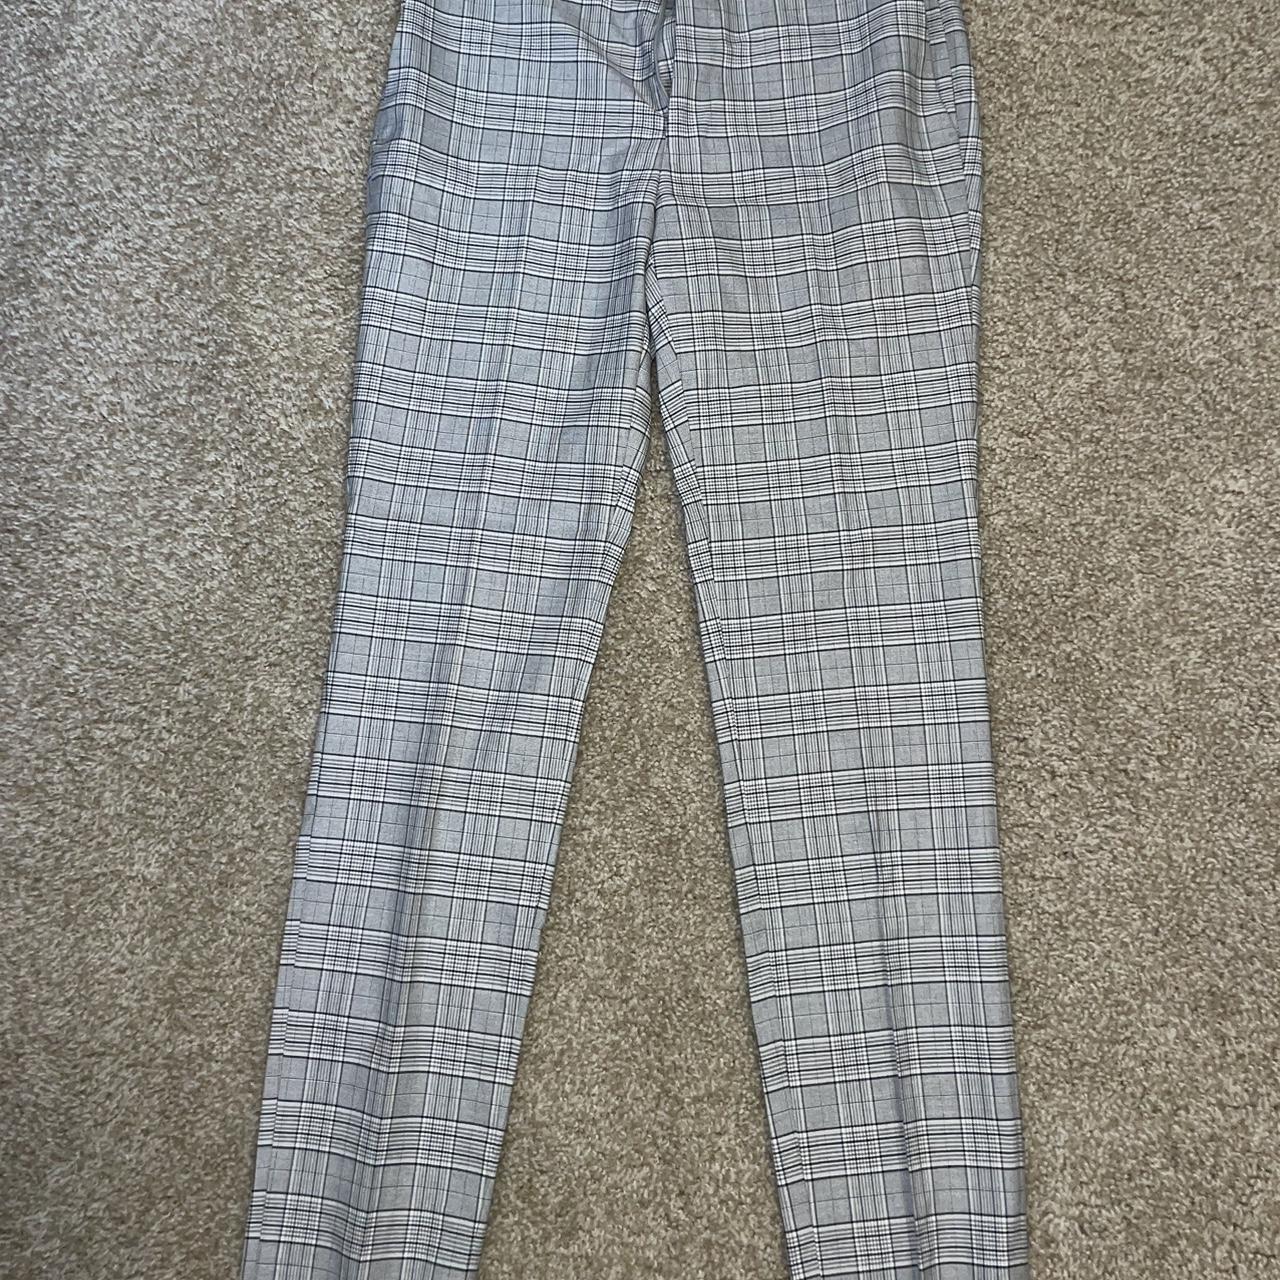 Topman checked trousers | Checked trousers, Topman, Trousers